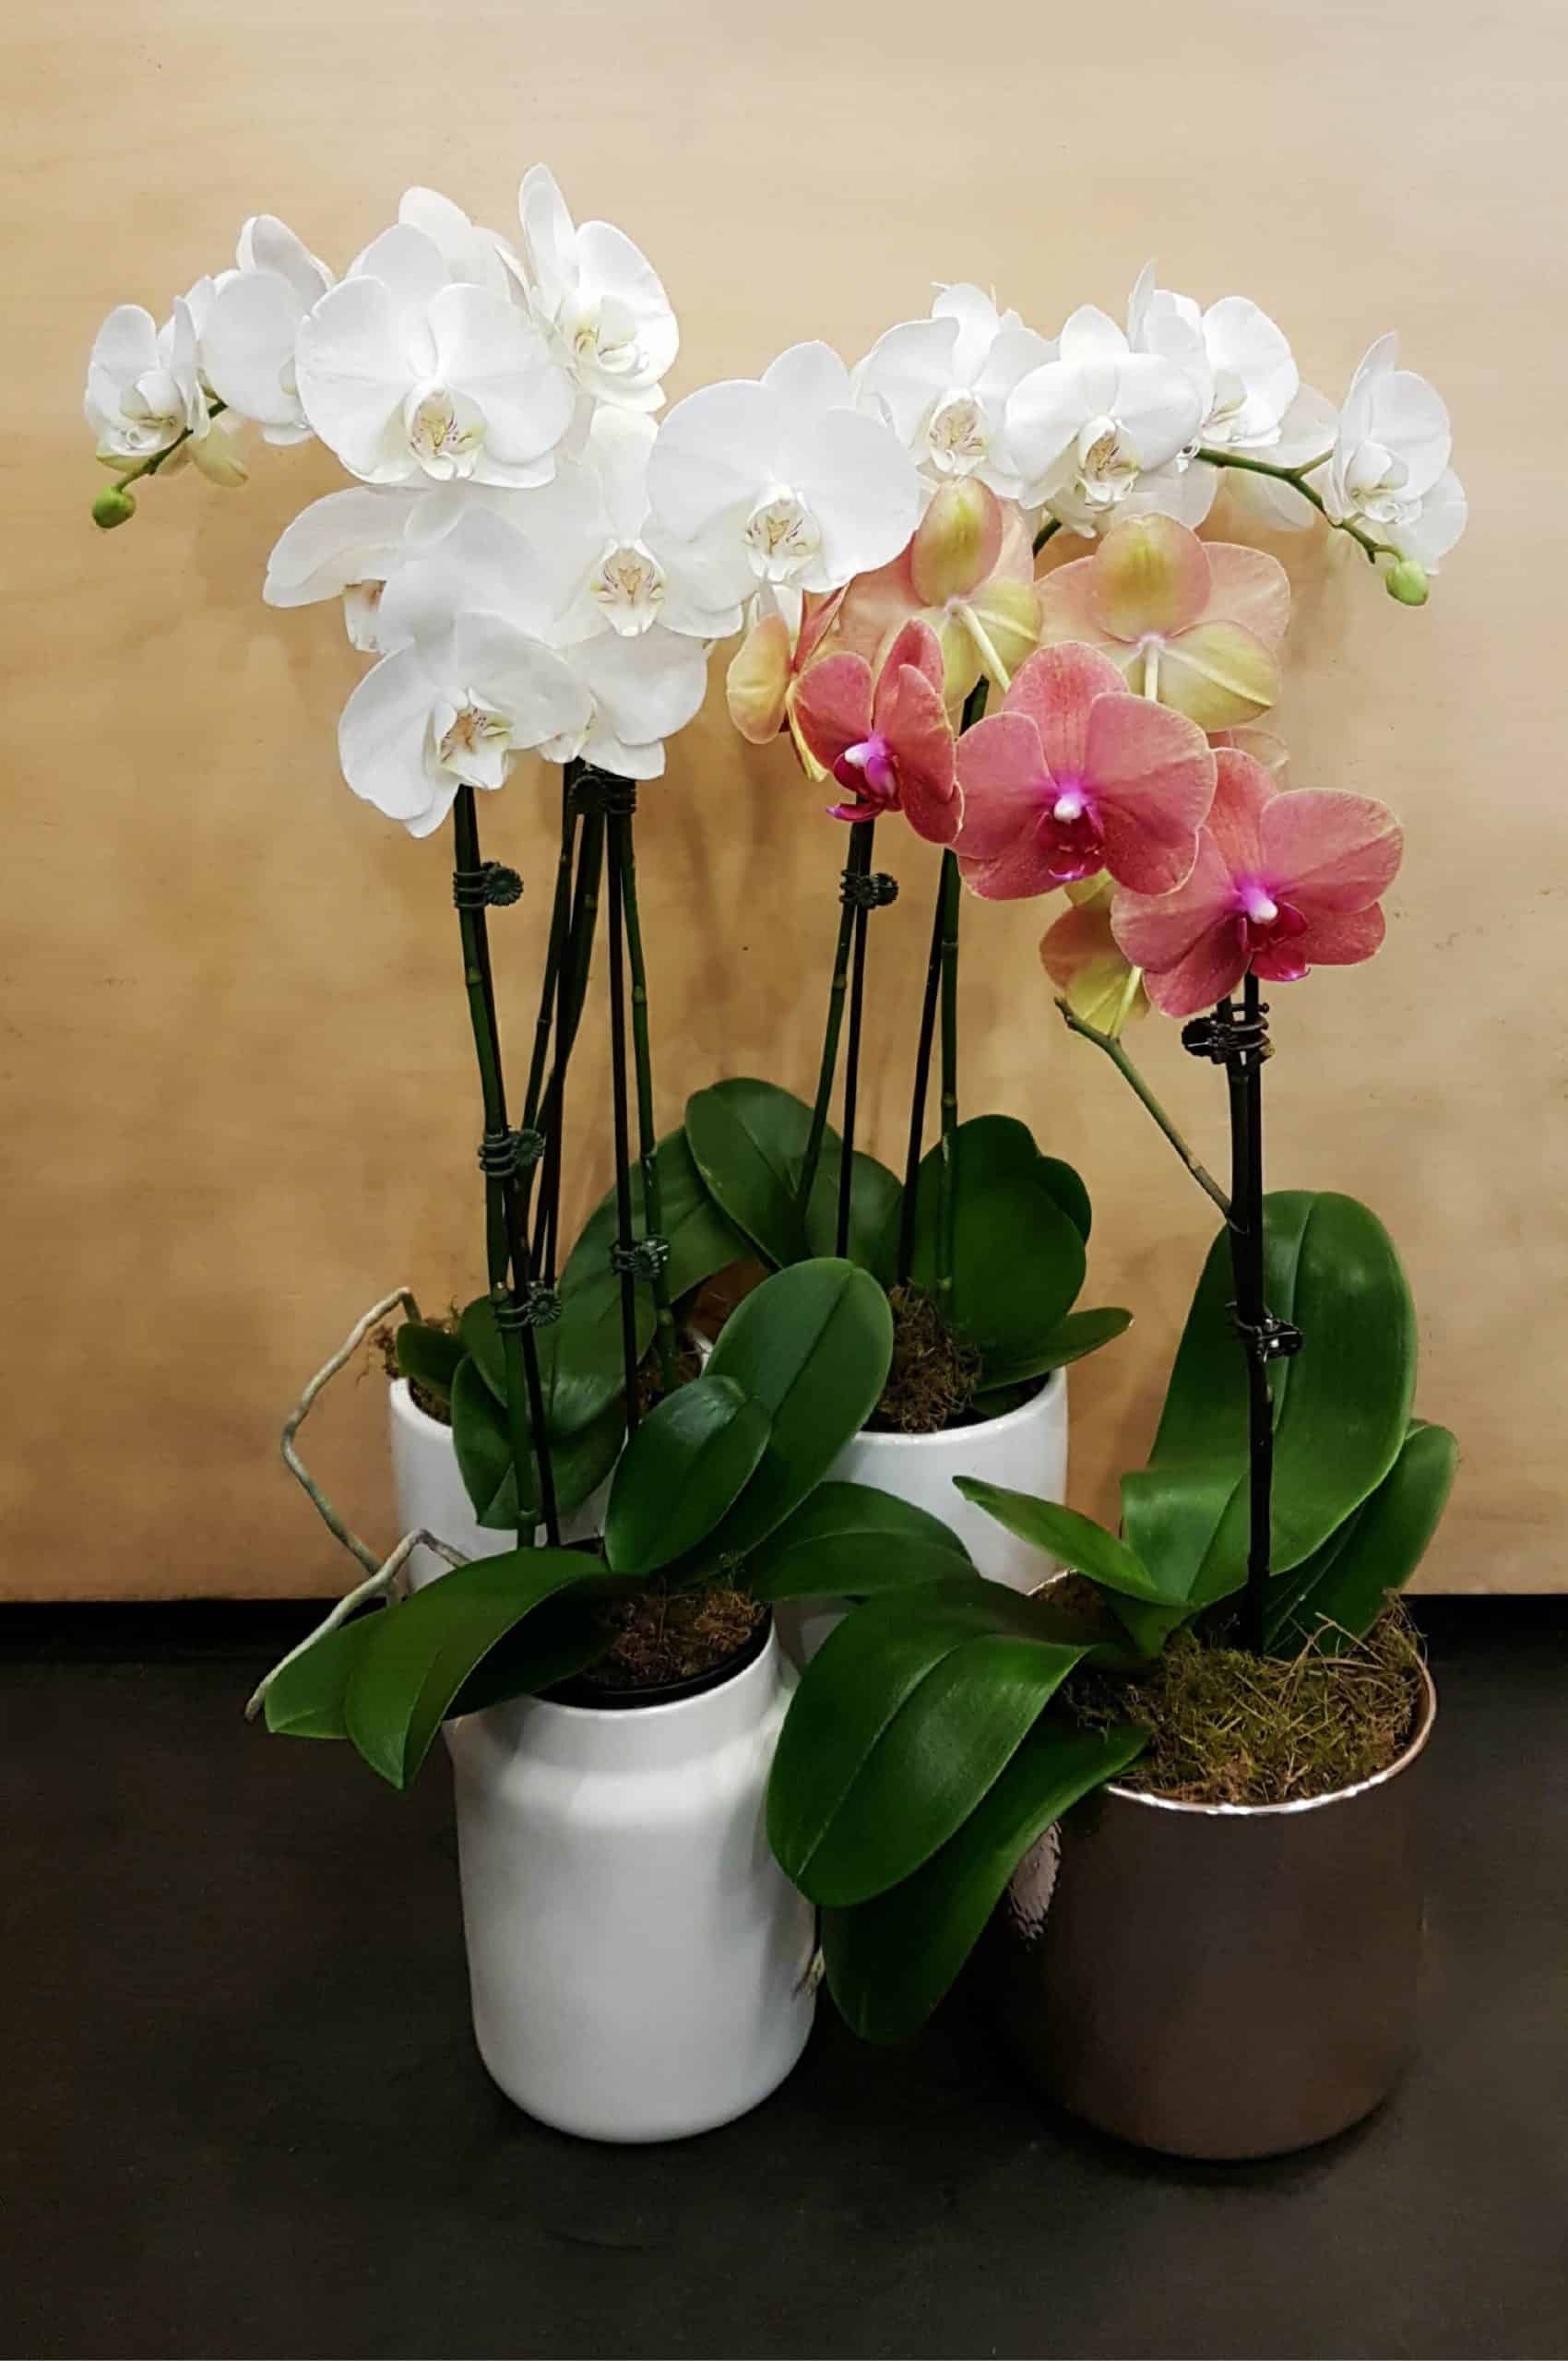 Requirements for Phalaenopsis orchids